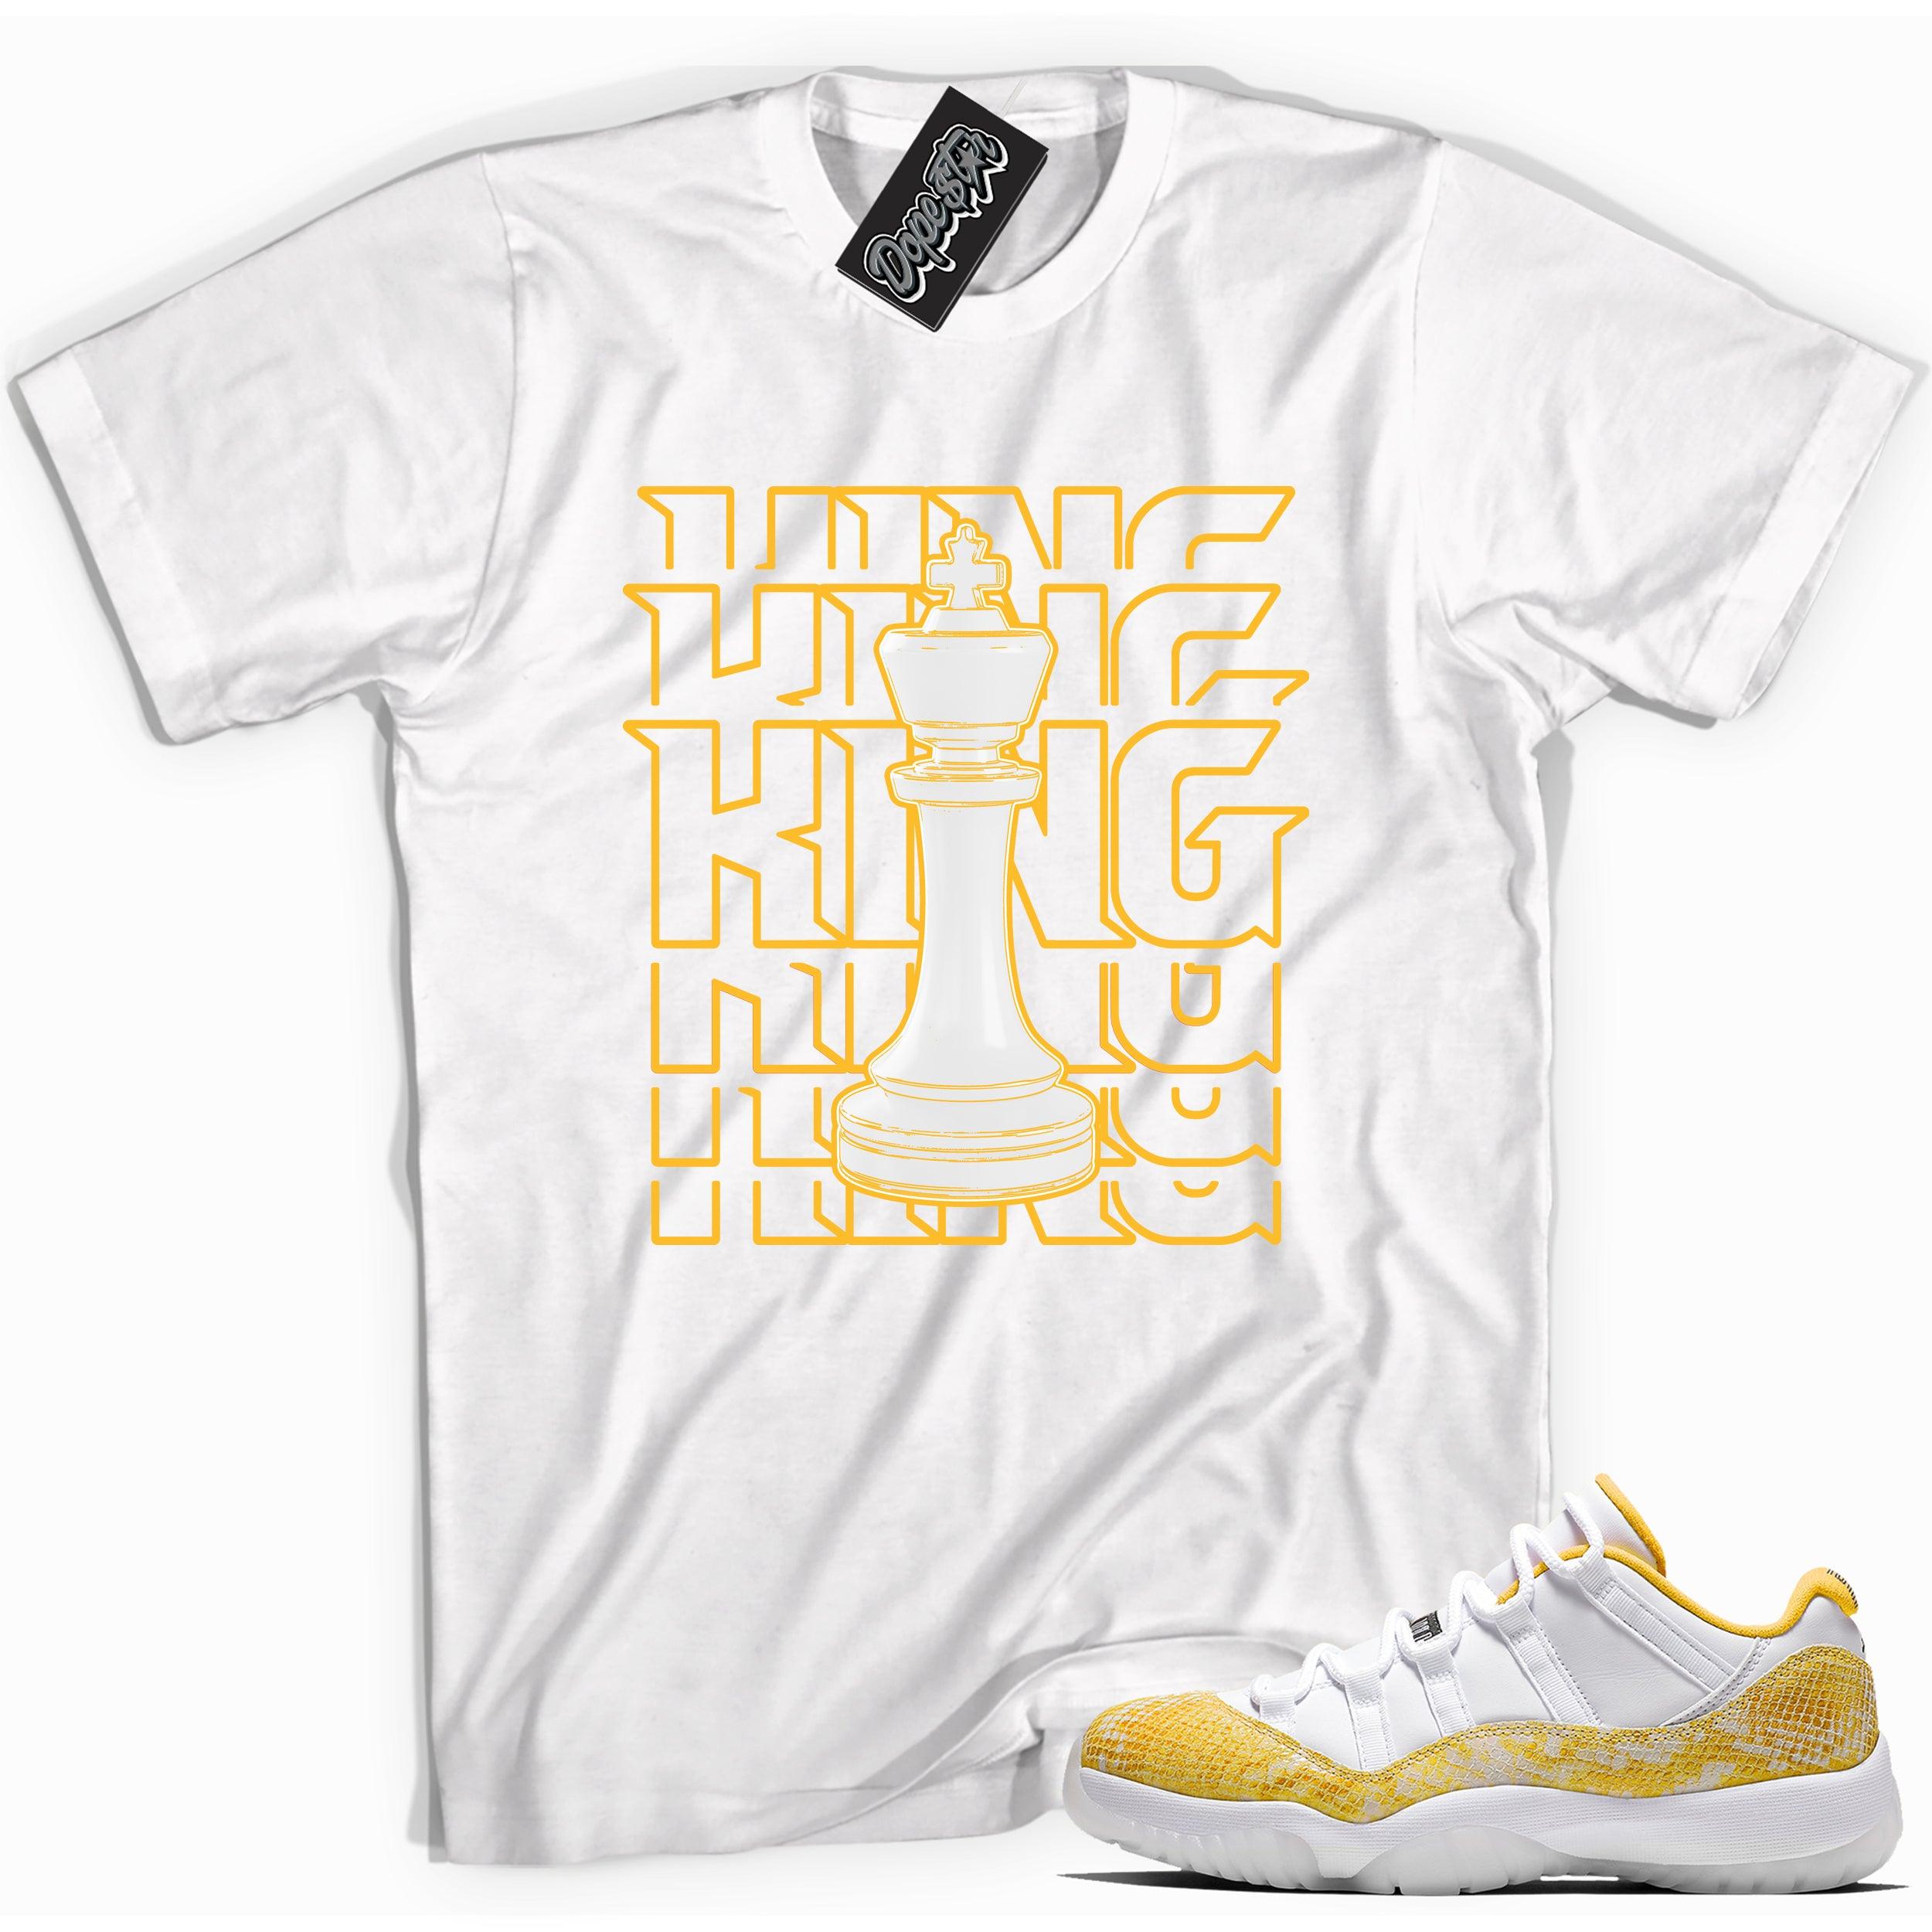 Cool white graphic tee with 'King' print, that perfectly matches  Air Jordan 11 Low Yellow Snakeskin sneakers